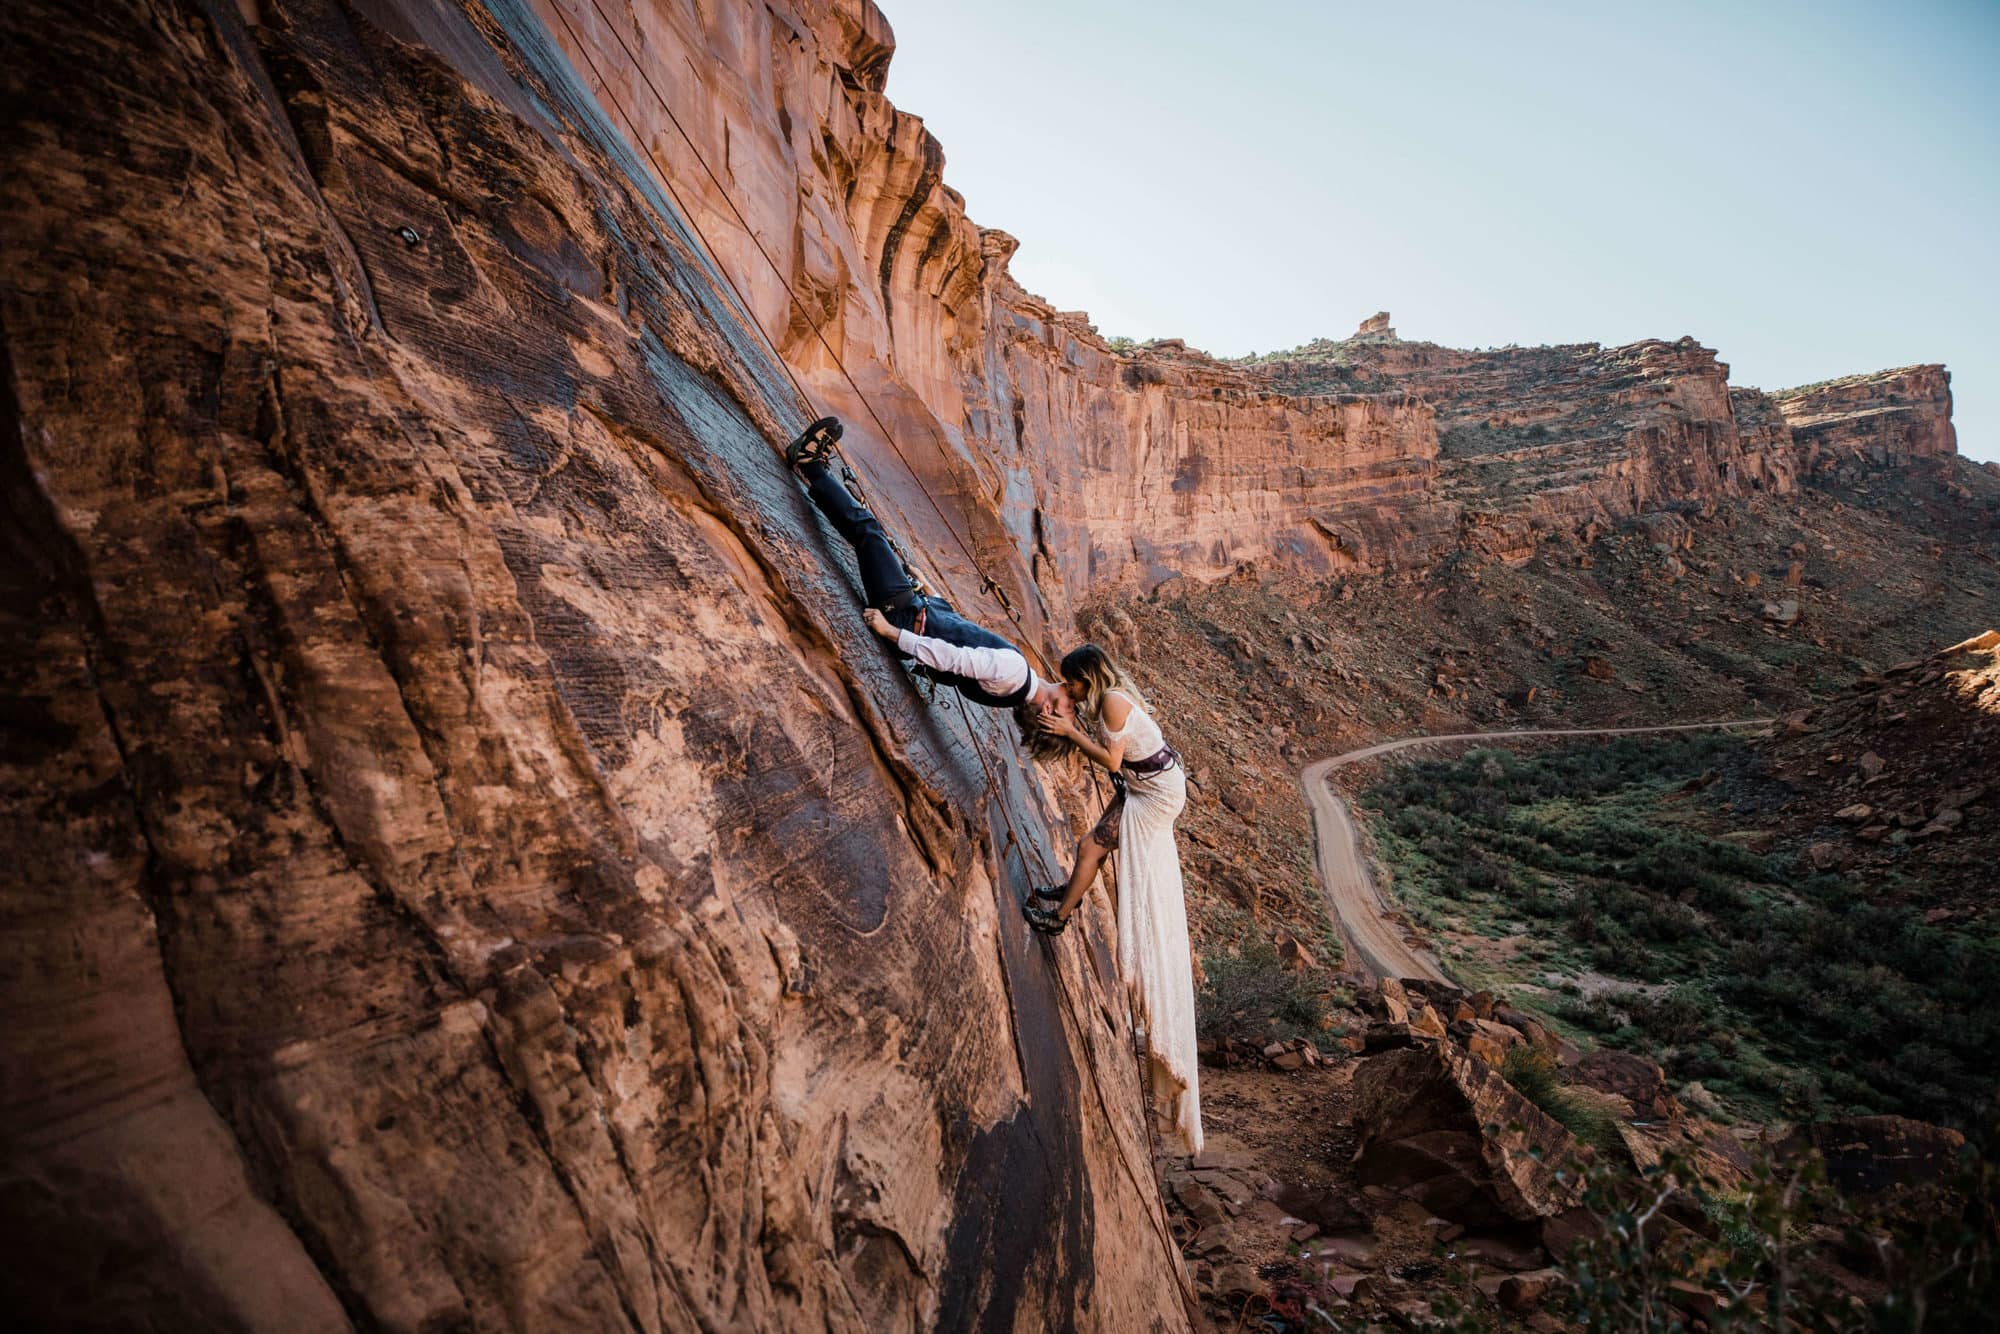 Moab is so the best place for an elopement. Check out this Moab elopement planning guide for all the info you'll need to plan your elopement adventure.